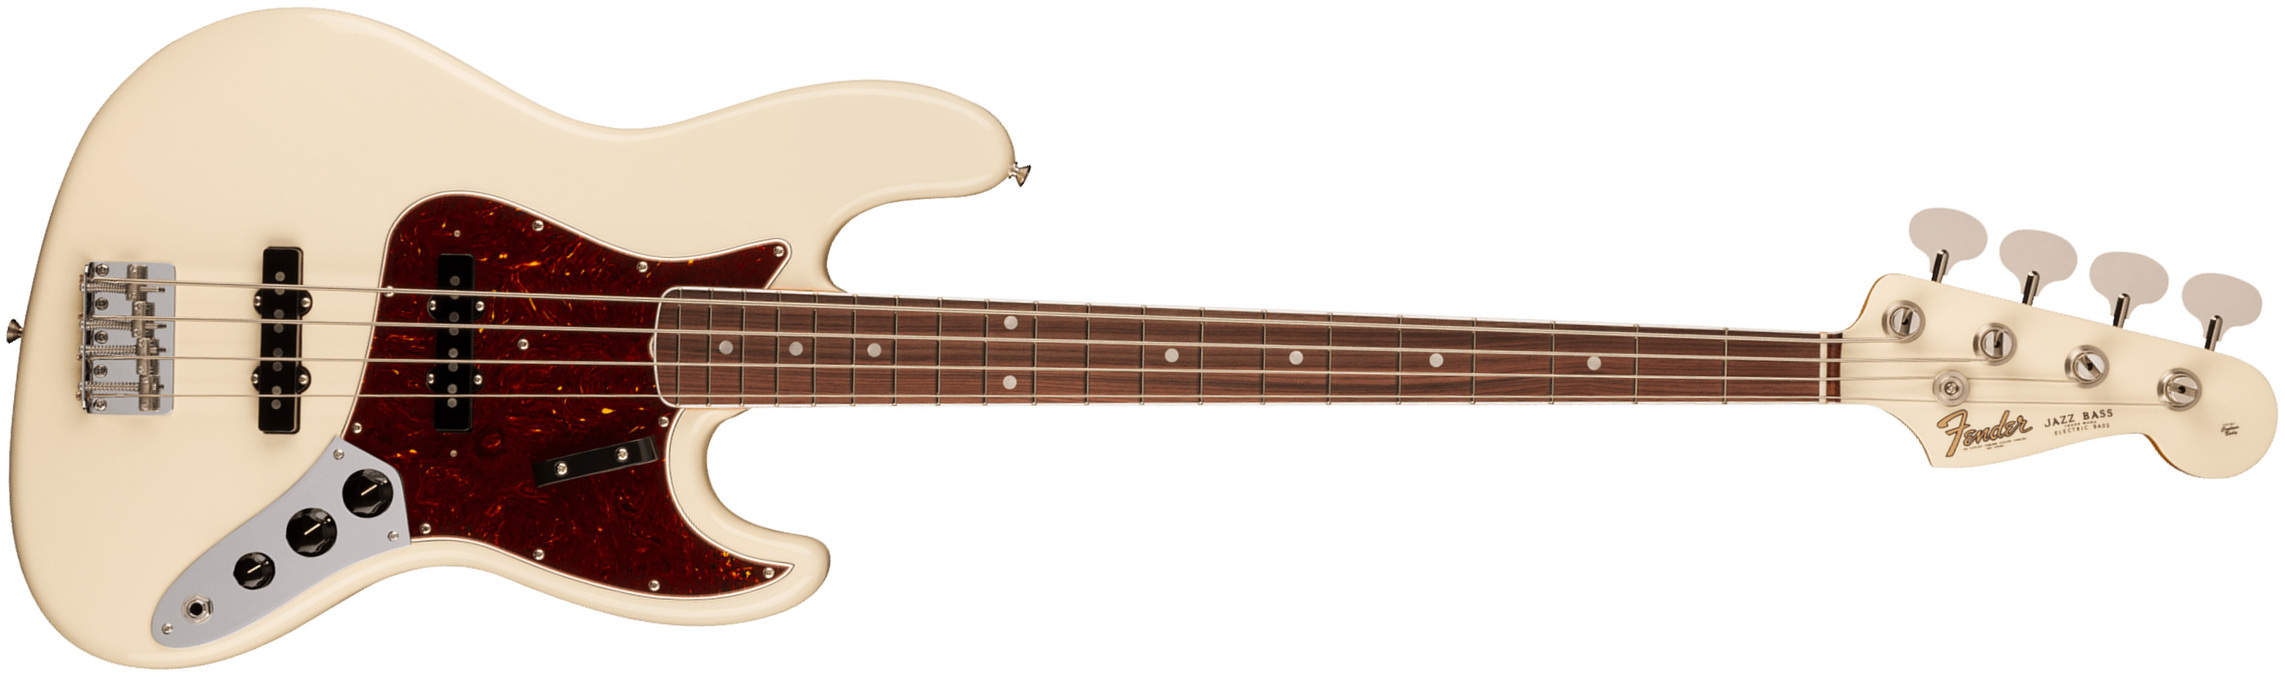 Fender Jazz Bass 1966 American Vintage Ii Usa Rw - Olympic White - Basse Électrique Solid Body - Main picture